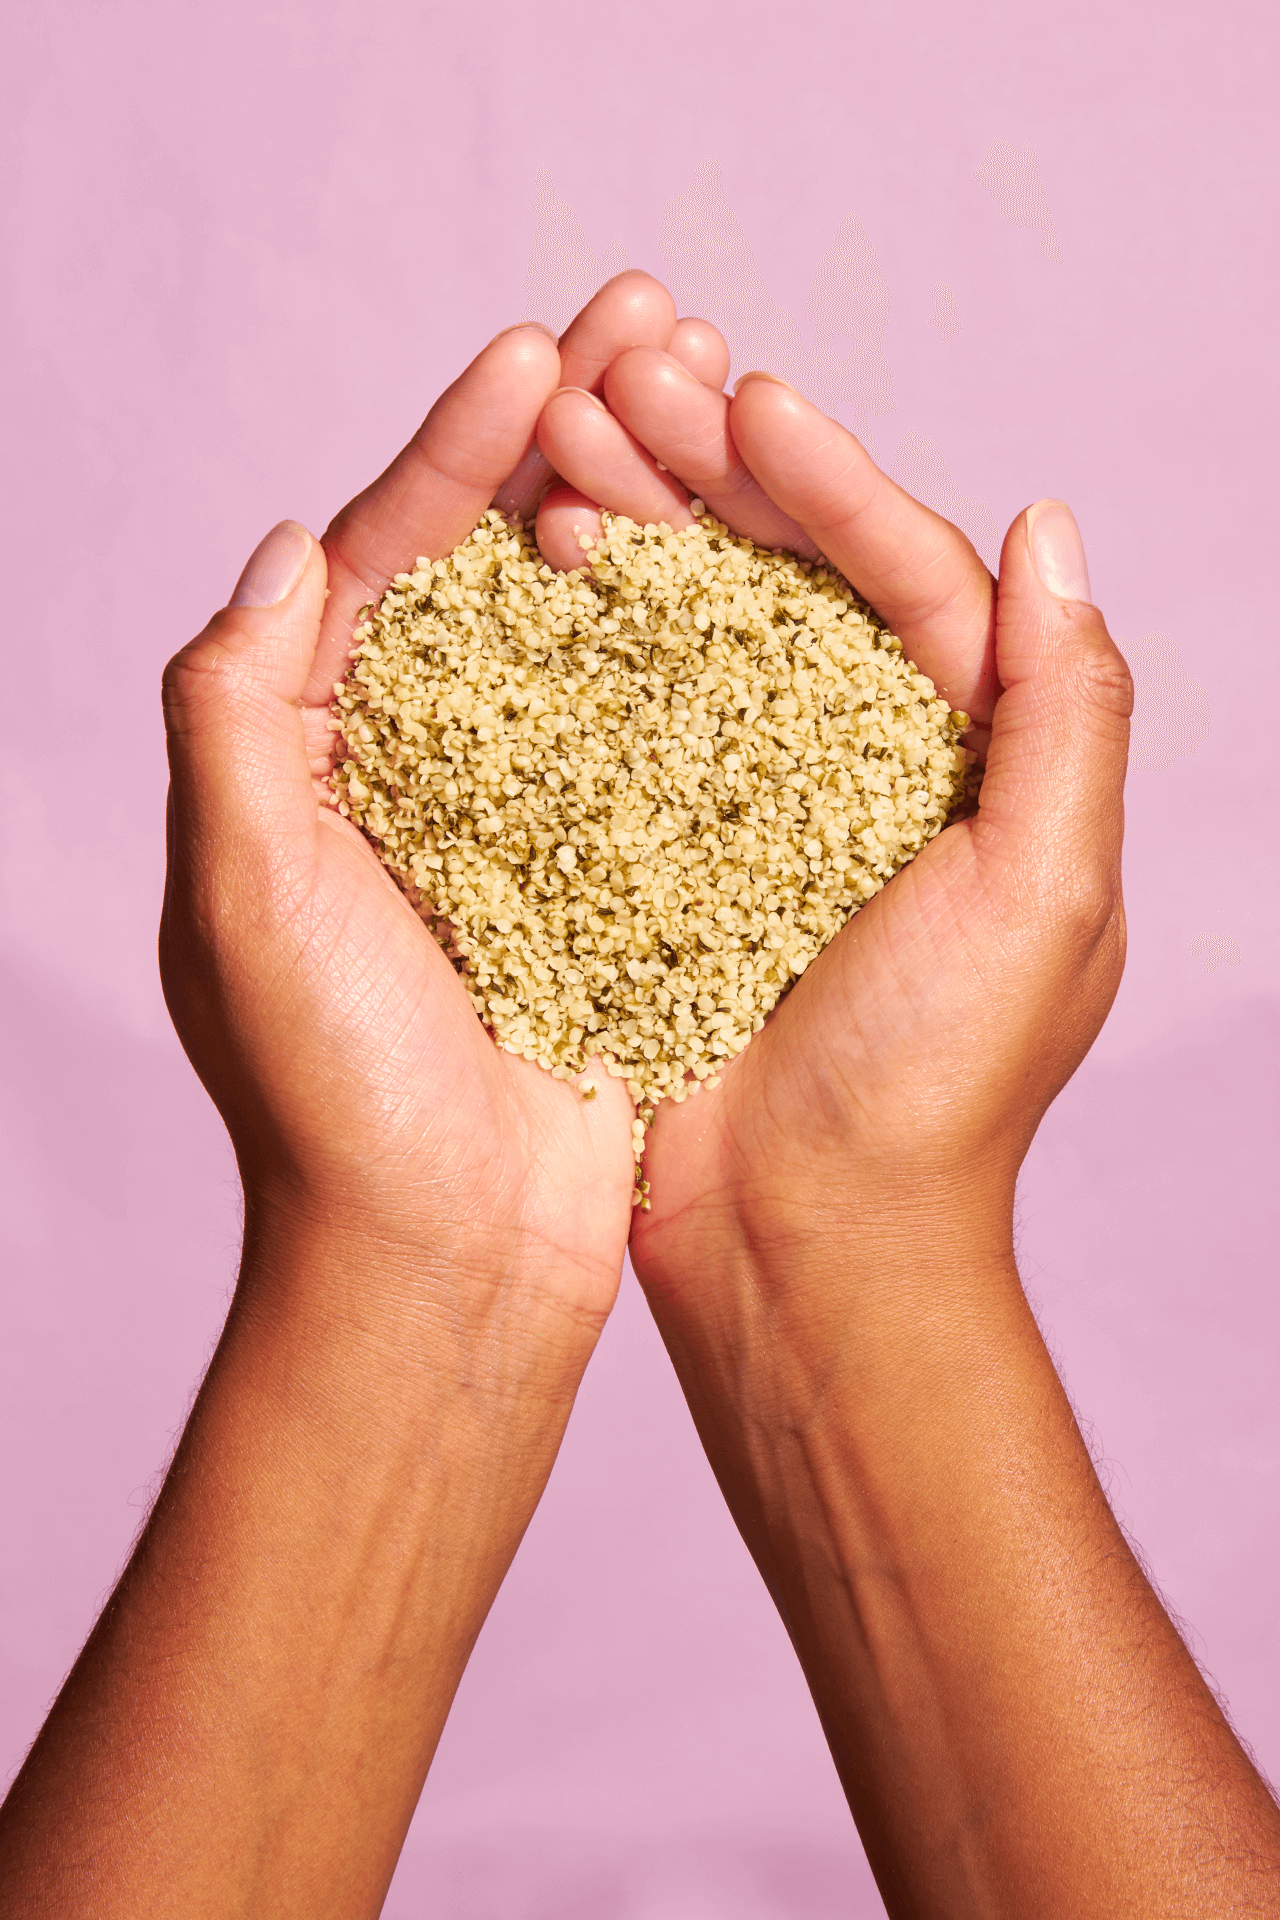 Can you eat too much hemp protein?